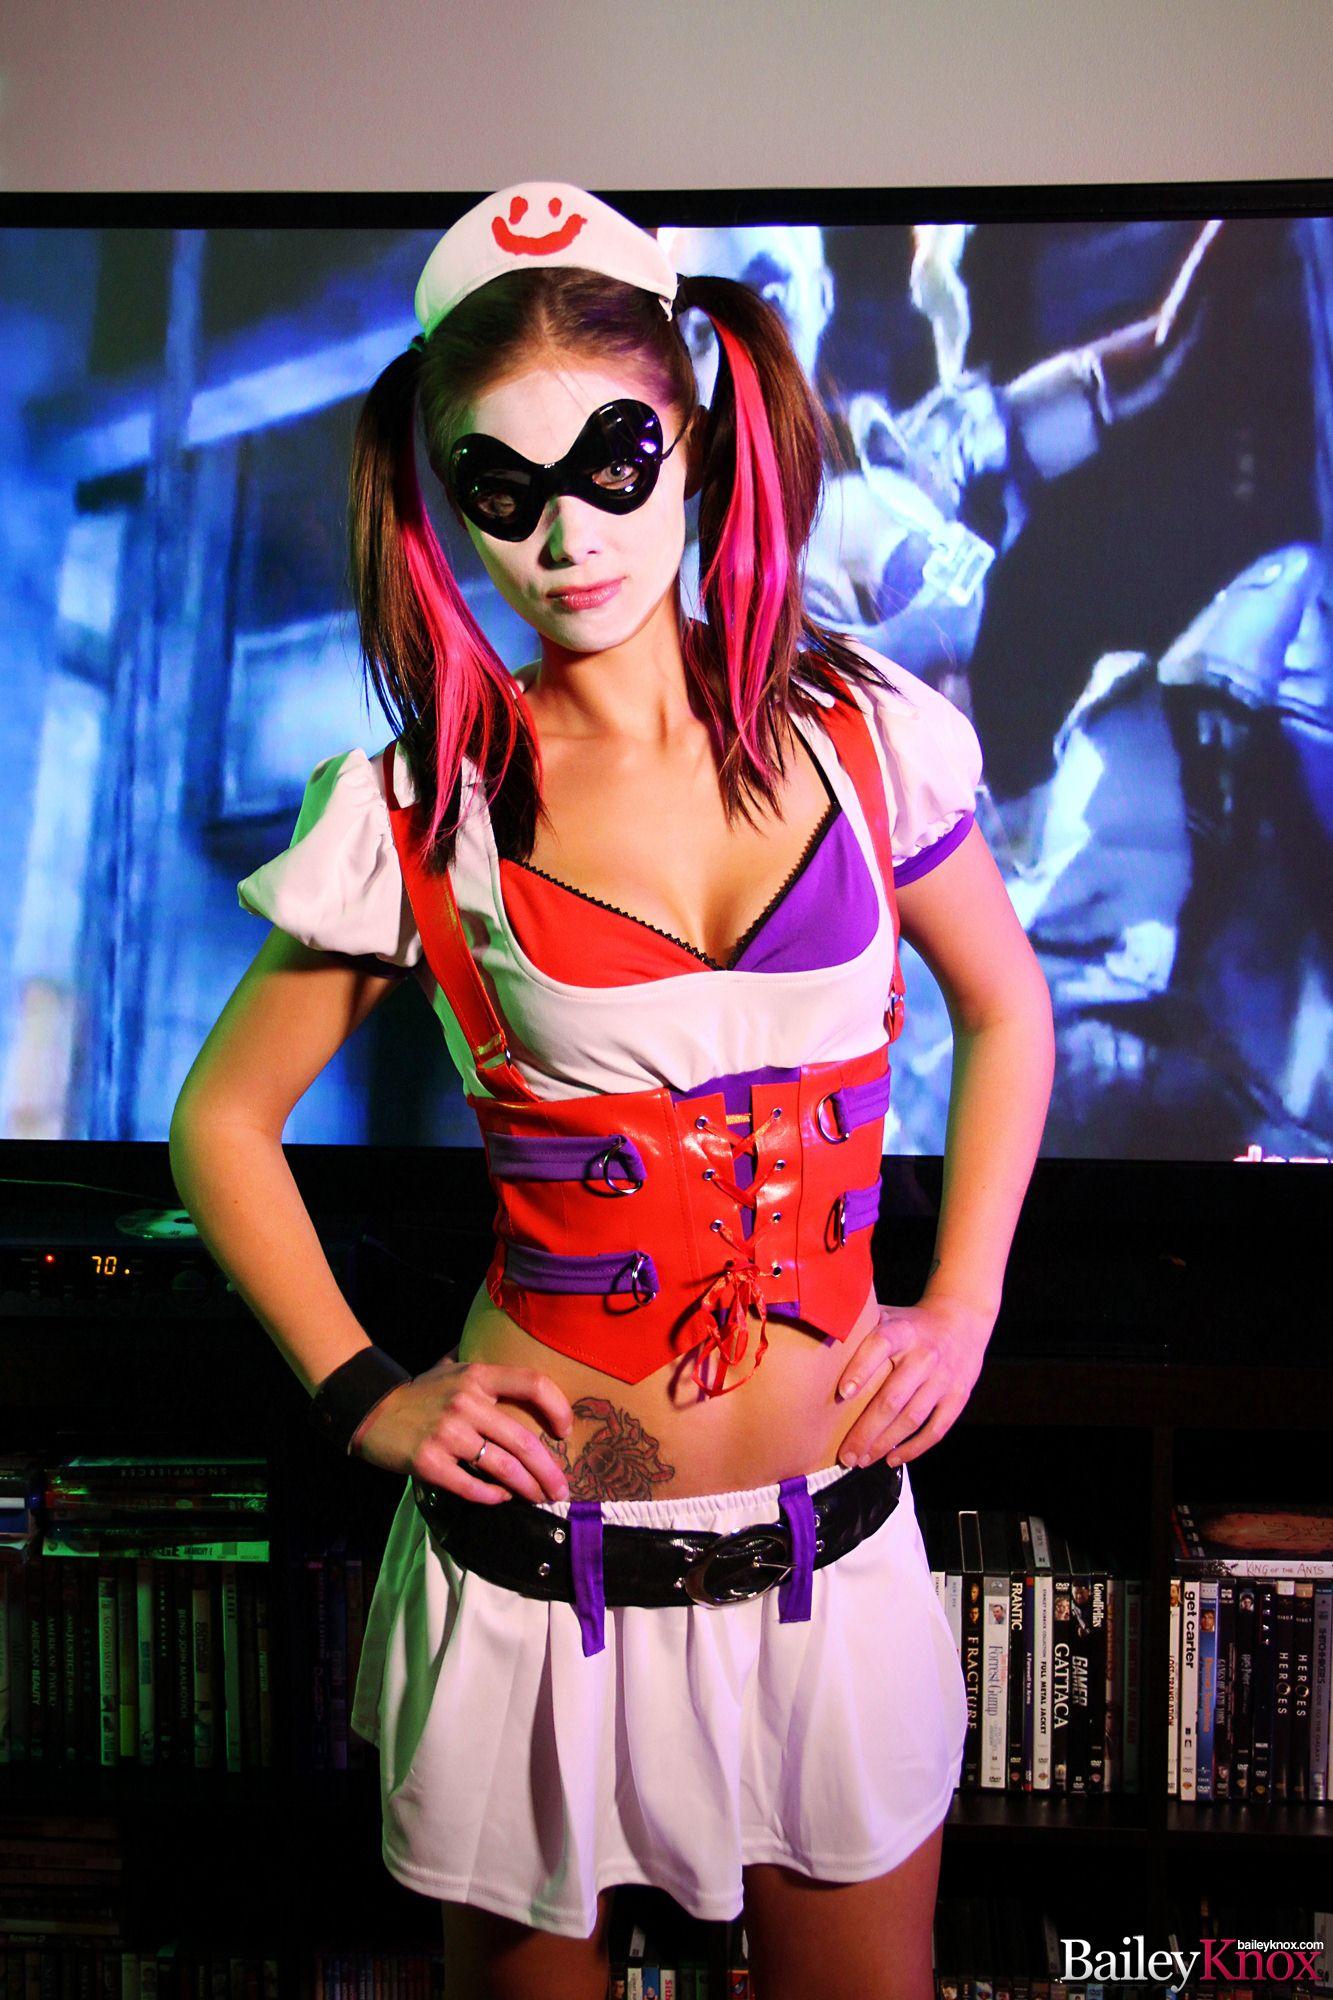 Bailey Knox gives you a little Harley Quinn from Arkham Asylum cosplay #53399128